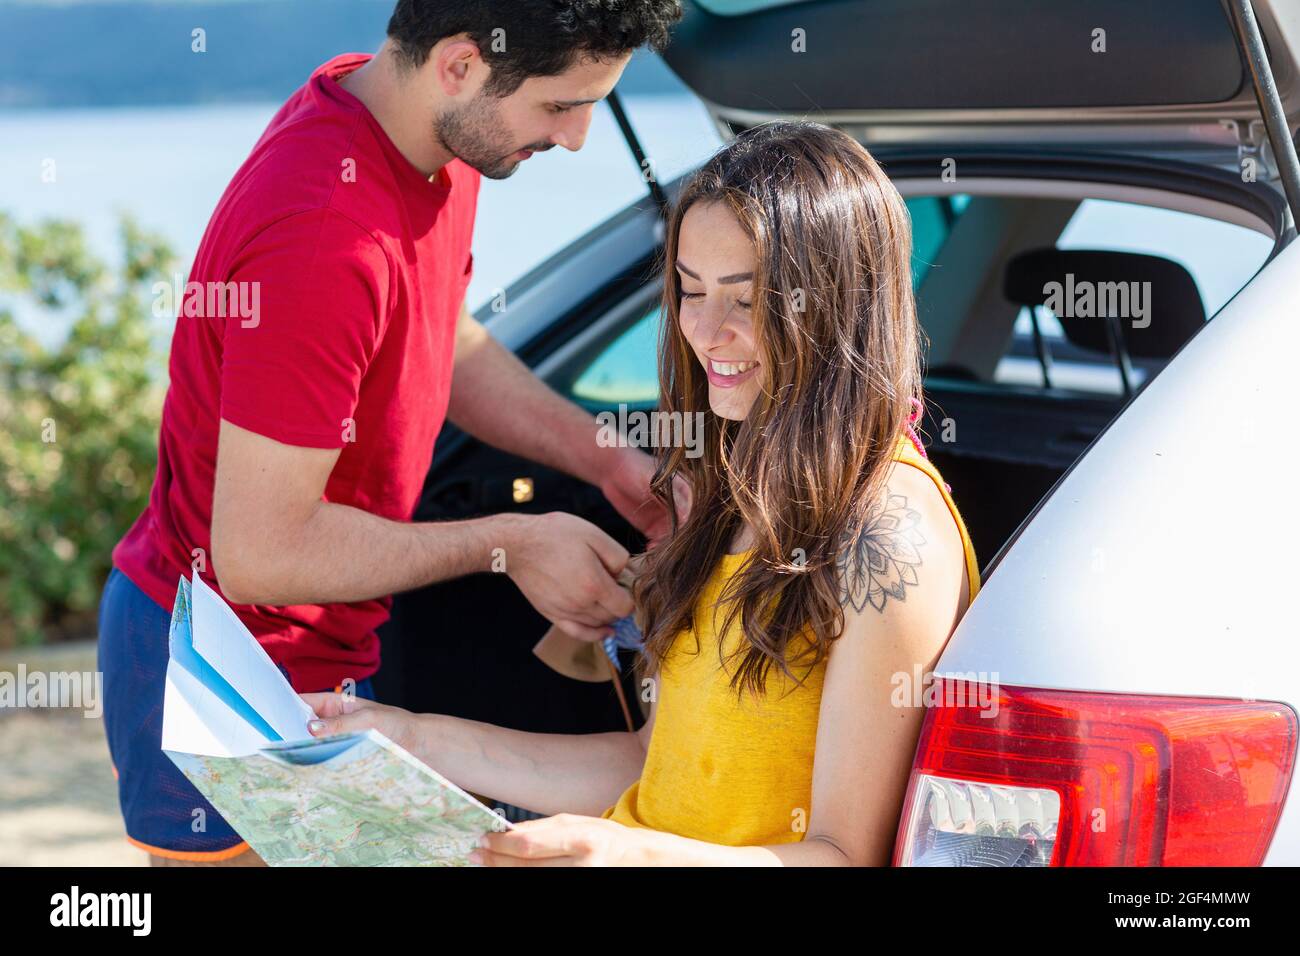 Smiling woman checking map while sitting in car trunk by boyfriend Stock Photo